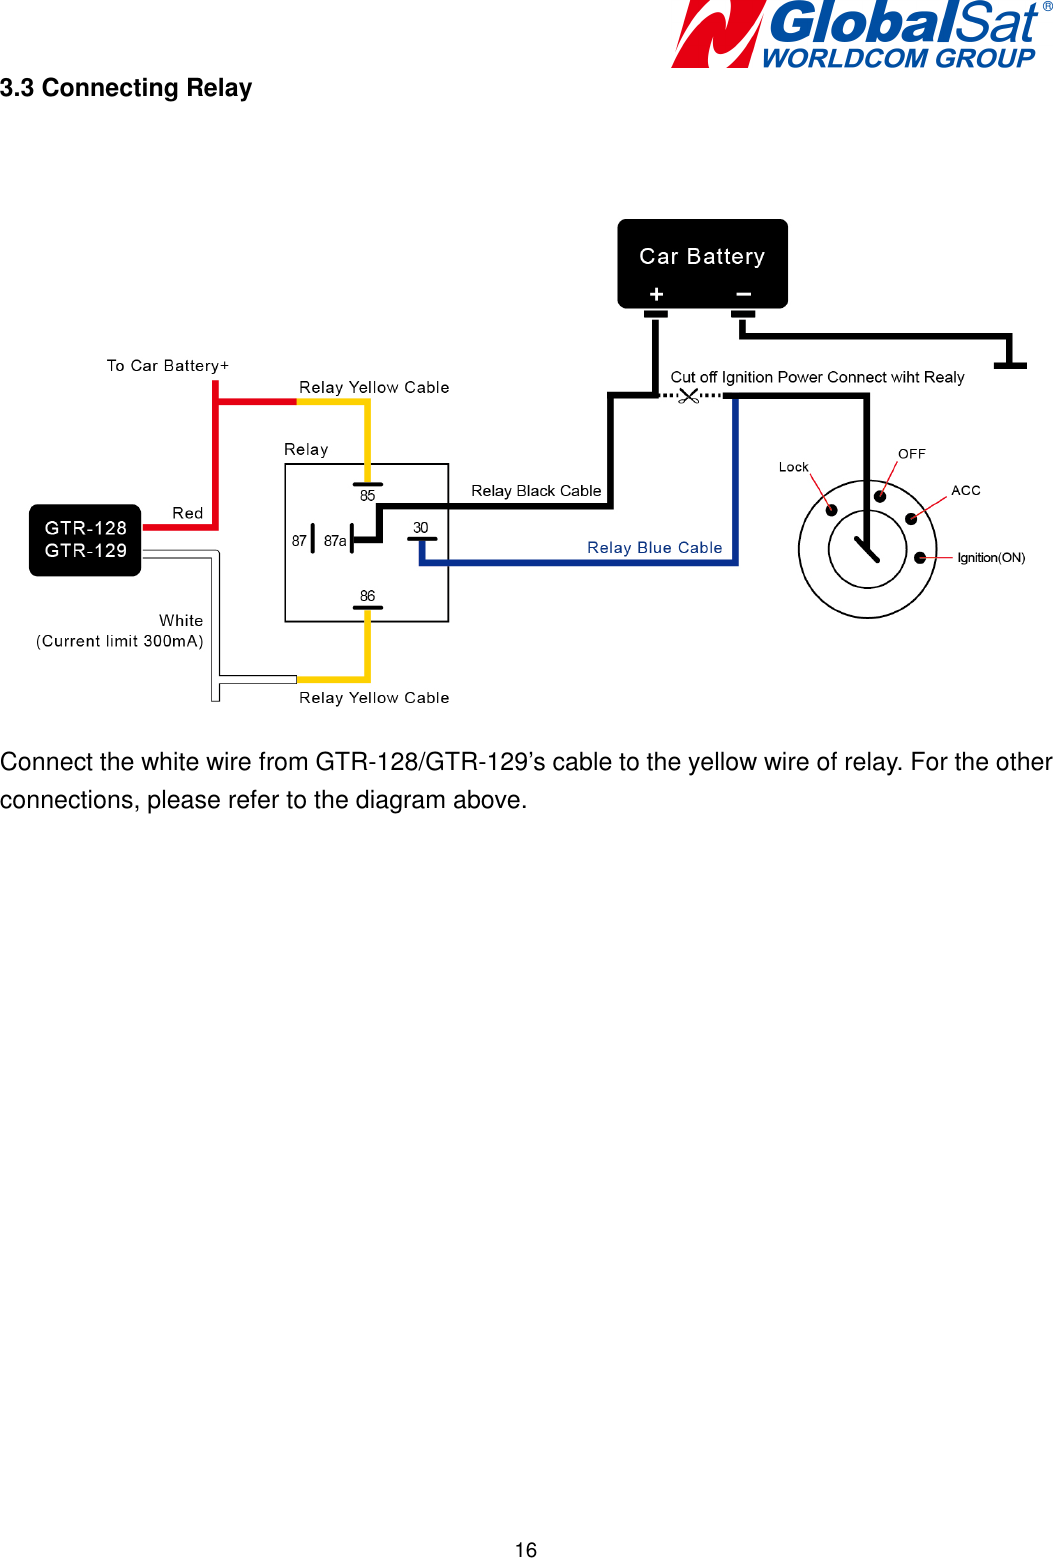   163.3 Connecting Relay      Connect the white wire from GTR-128/GTR-129’s cable to the yellow wire of relay. For the other connections, please refer to the diagram above. 